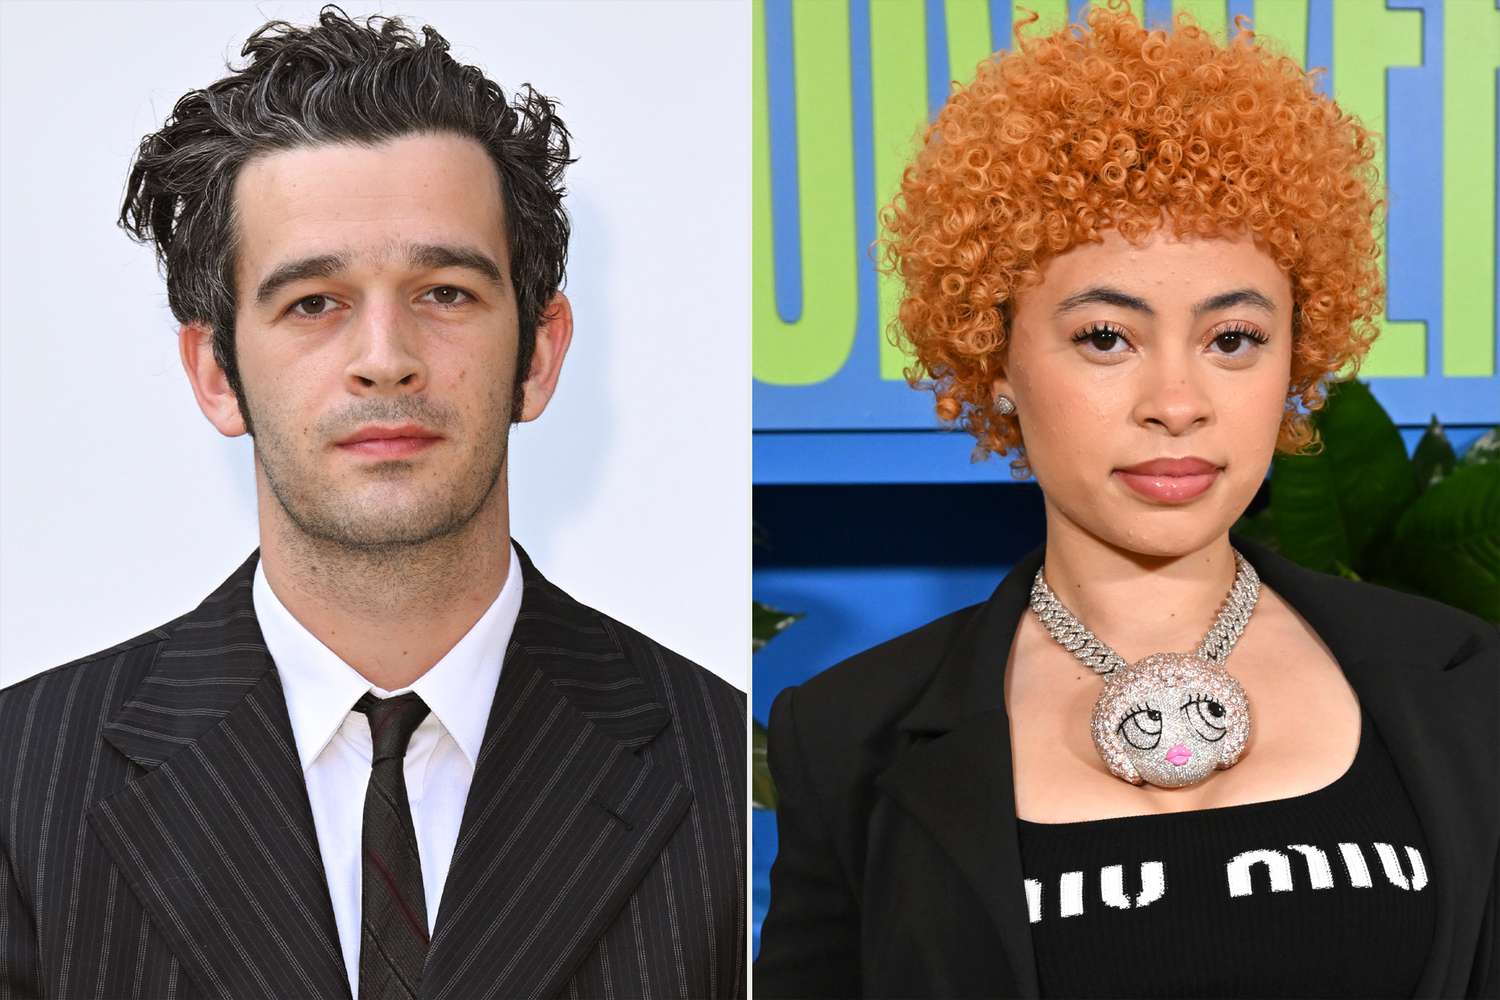 Matty Healy reacts to backlash over his Ice Spice comments